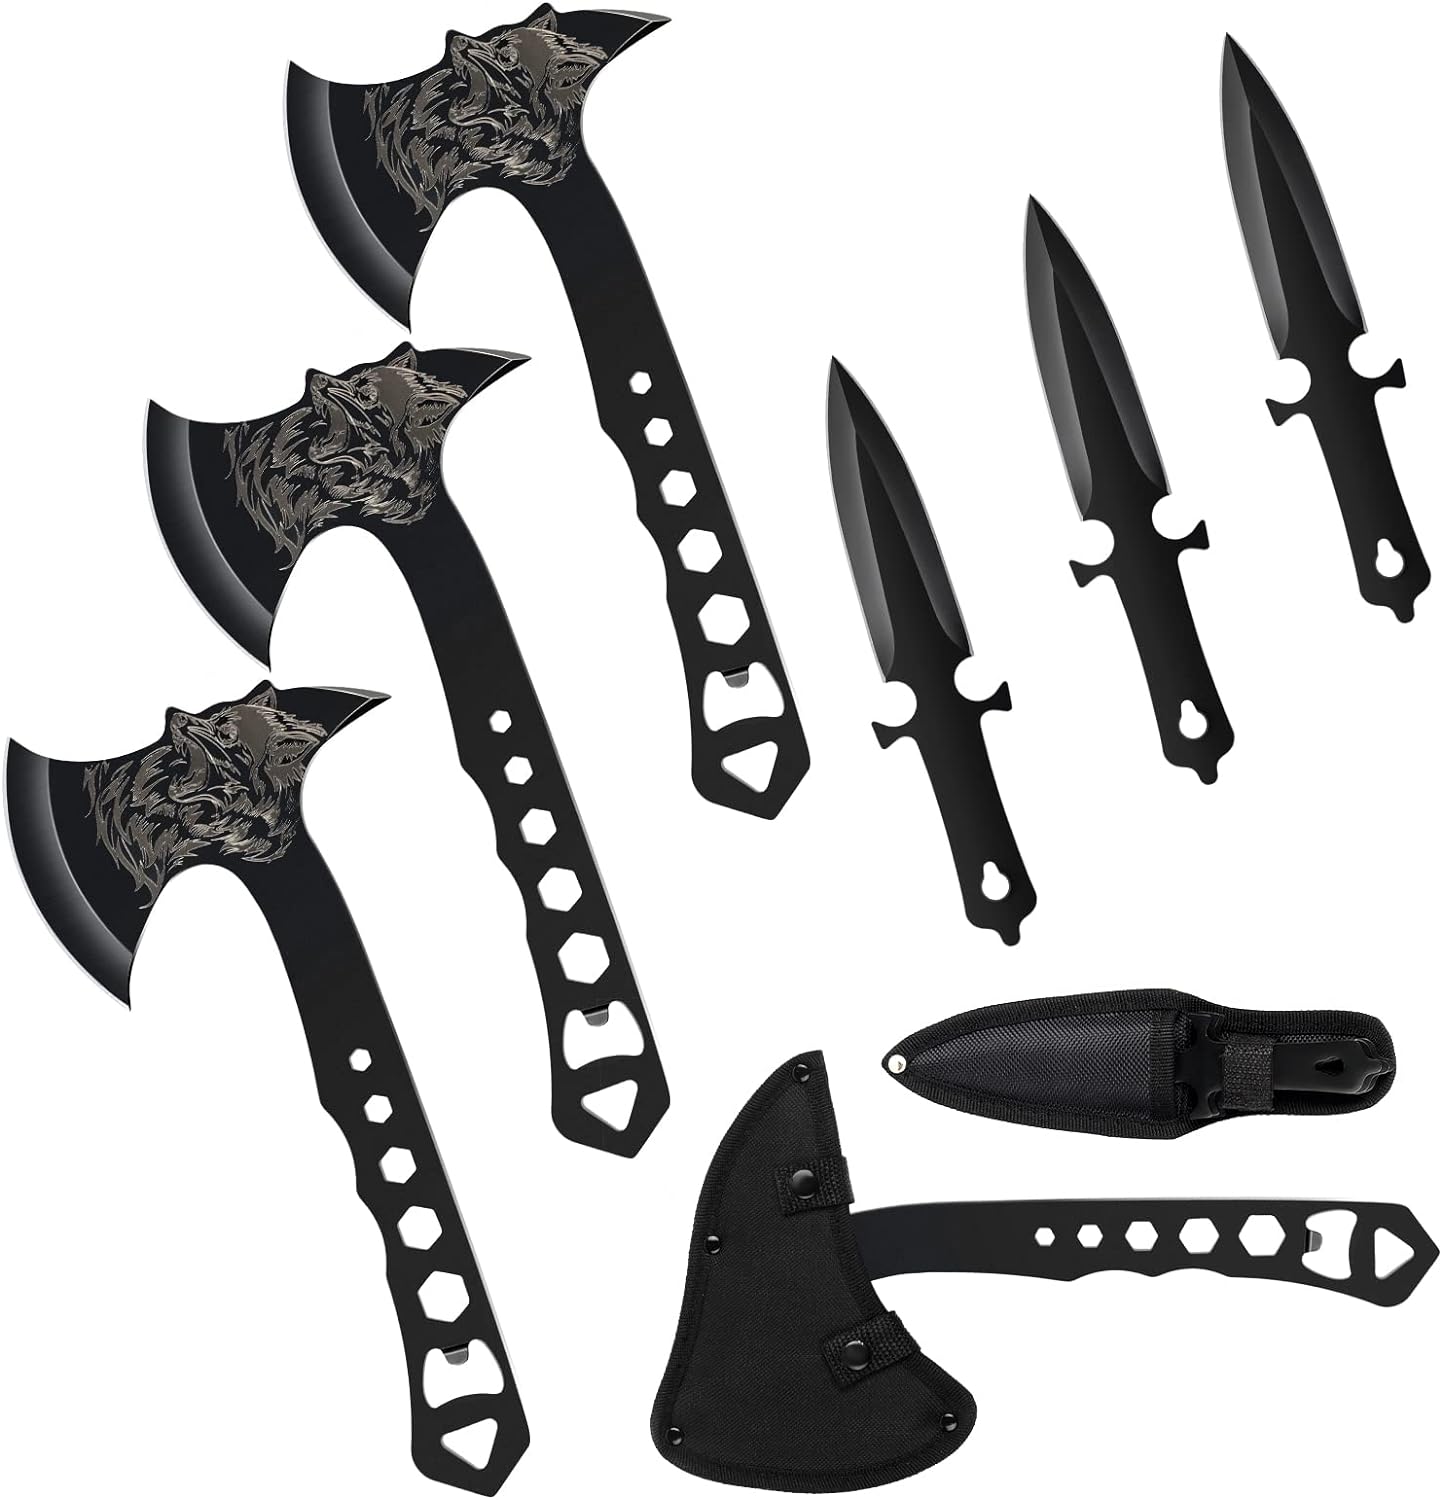  NedFoss Throwing Knives 6Pack, Ideal Companion for